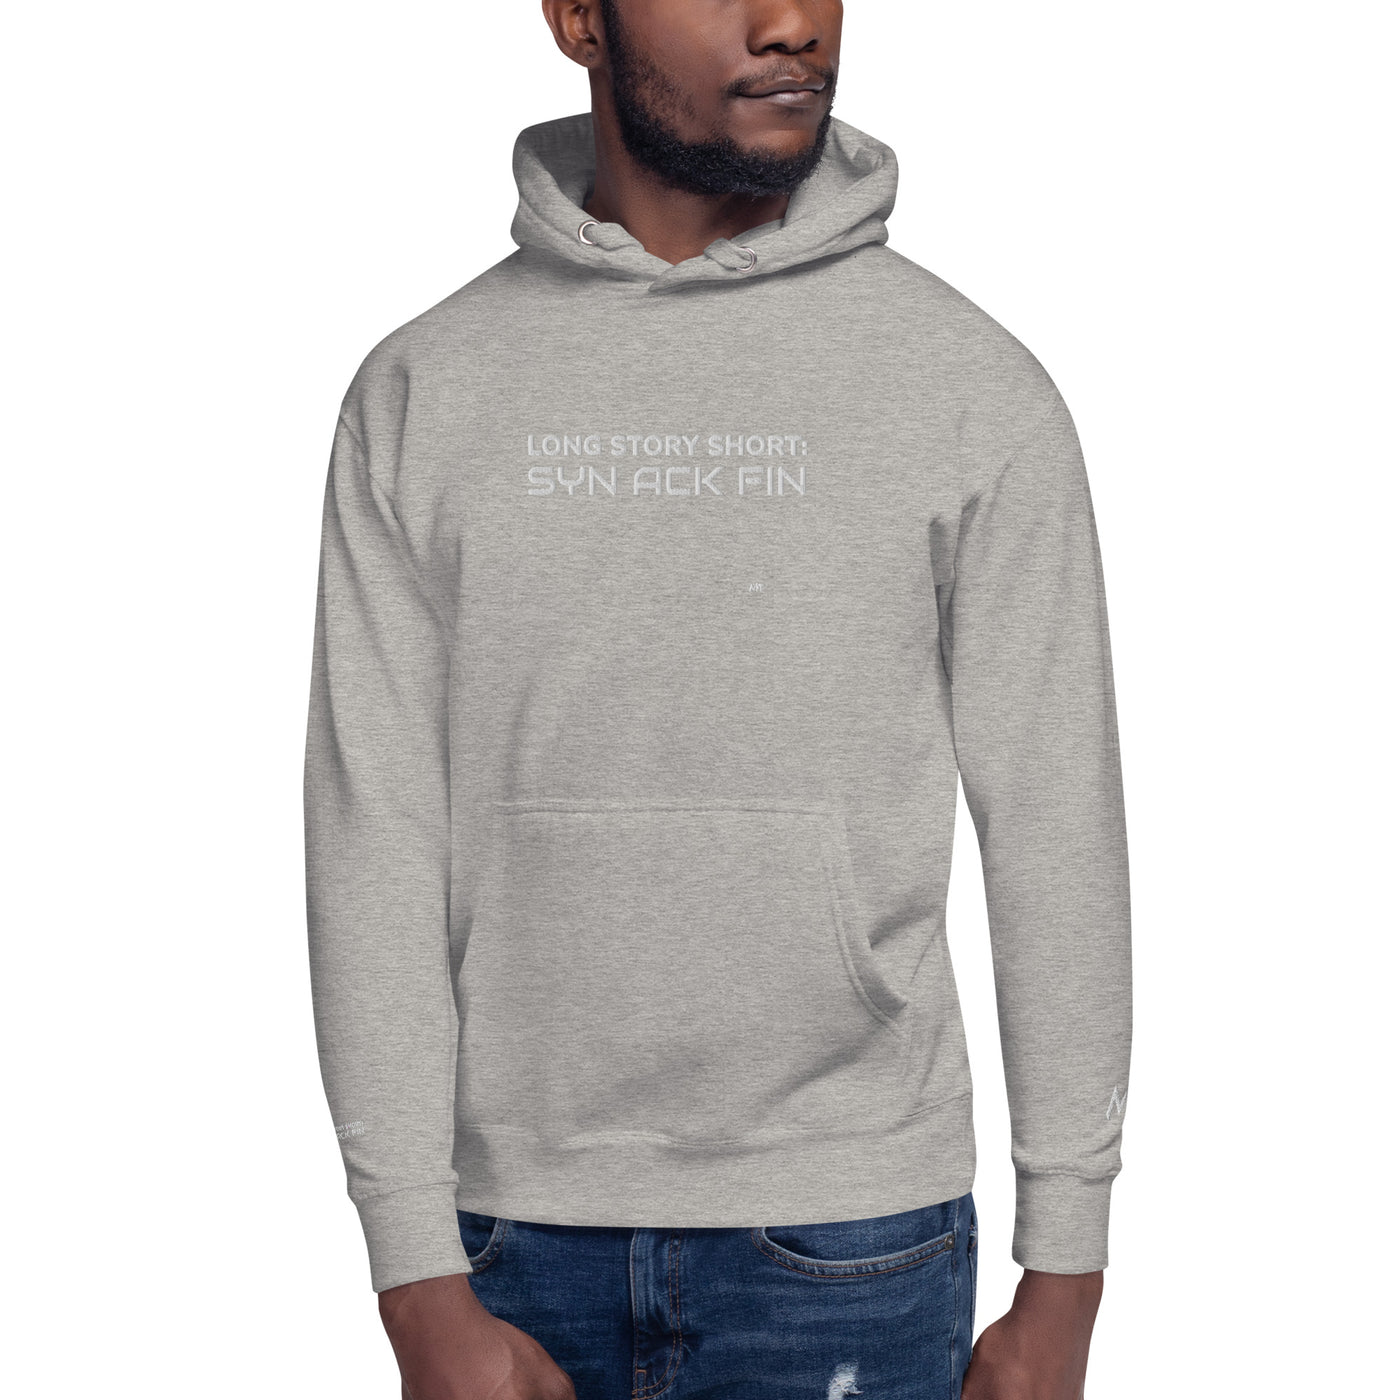 Long story short - Syn Ack Fin - Unisex Hoodie (Embroidery)